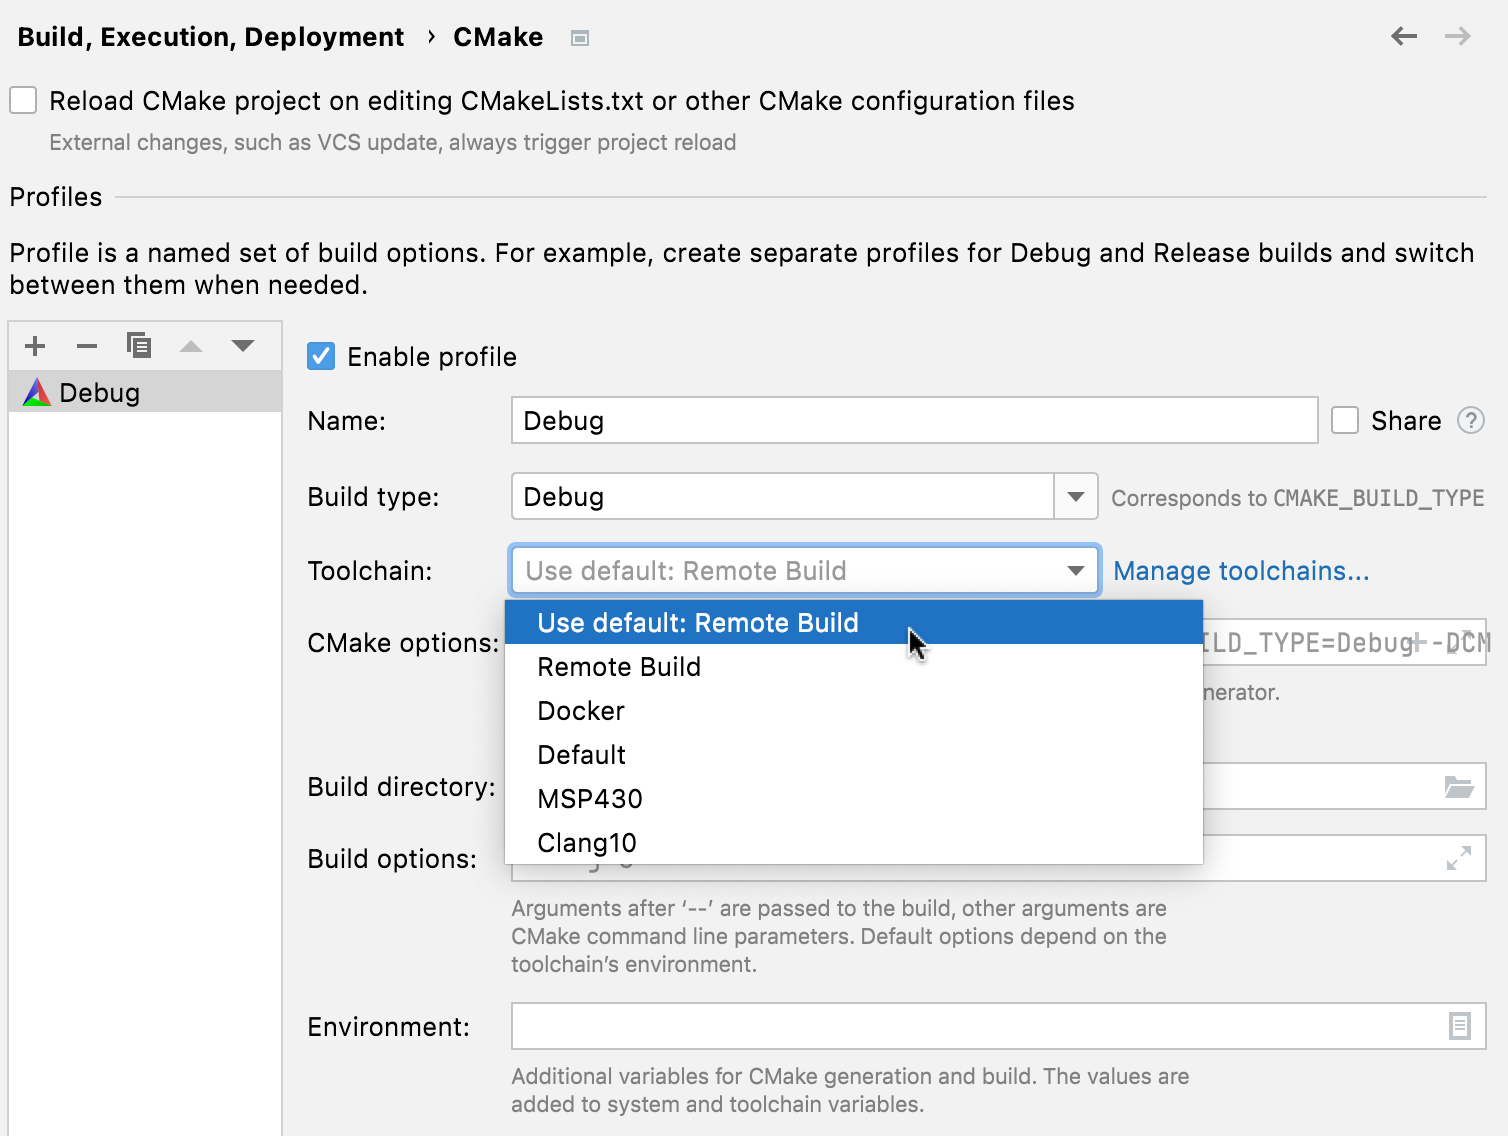 Settings the build toolchain in CMake profile